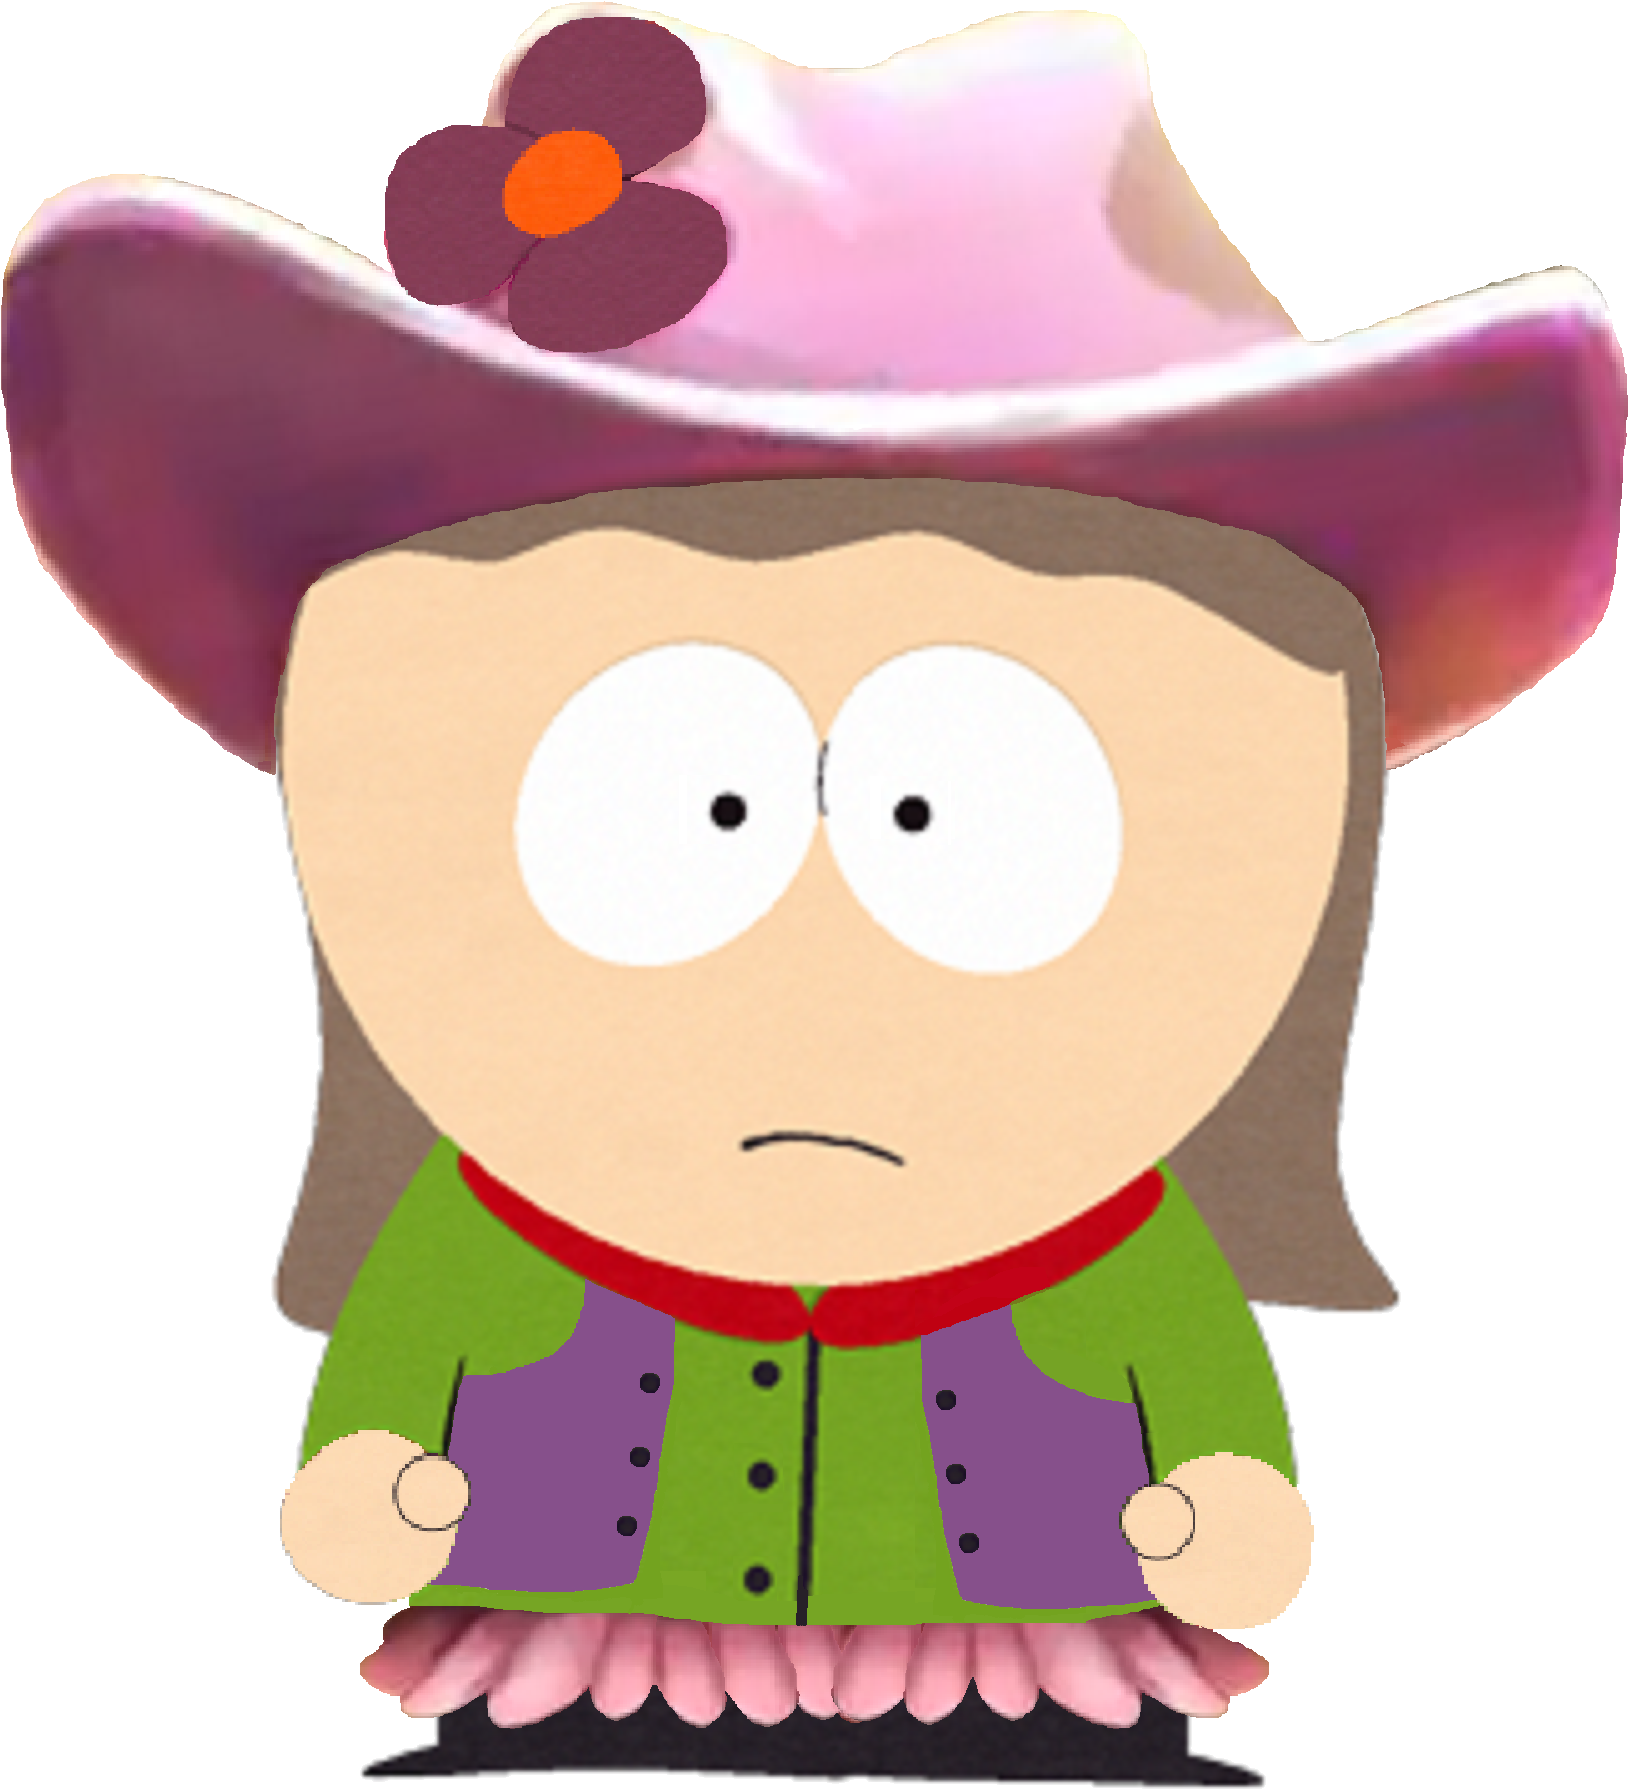 Calamity Heidi - South Park Fractured But Whole Heidi (1659x1832)